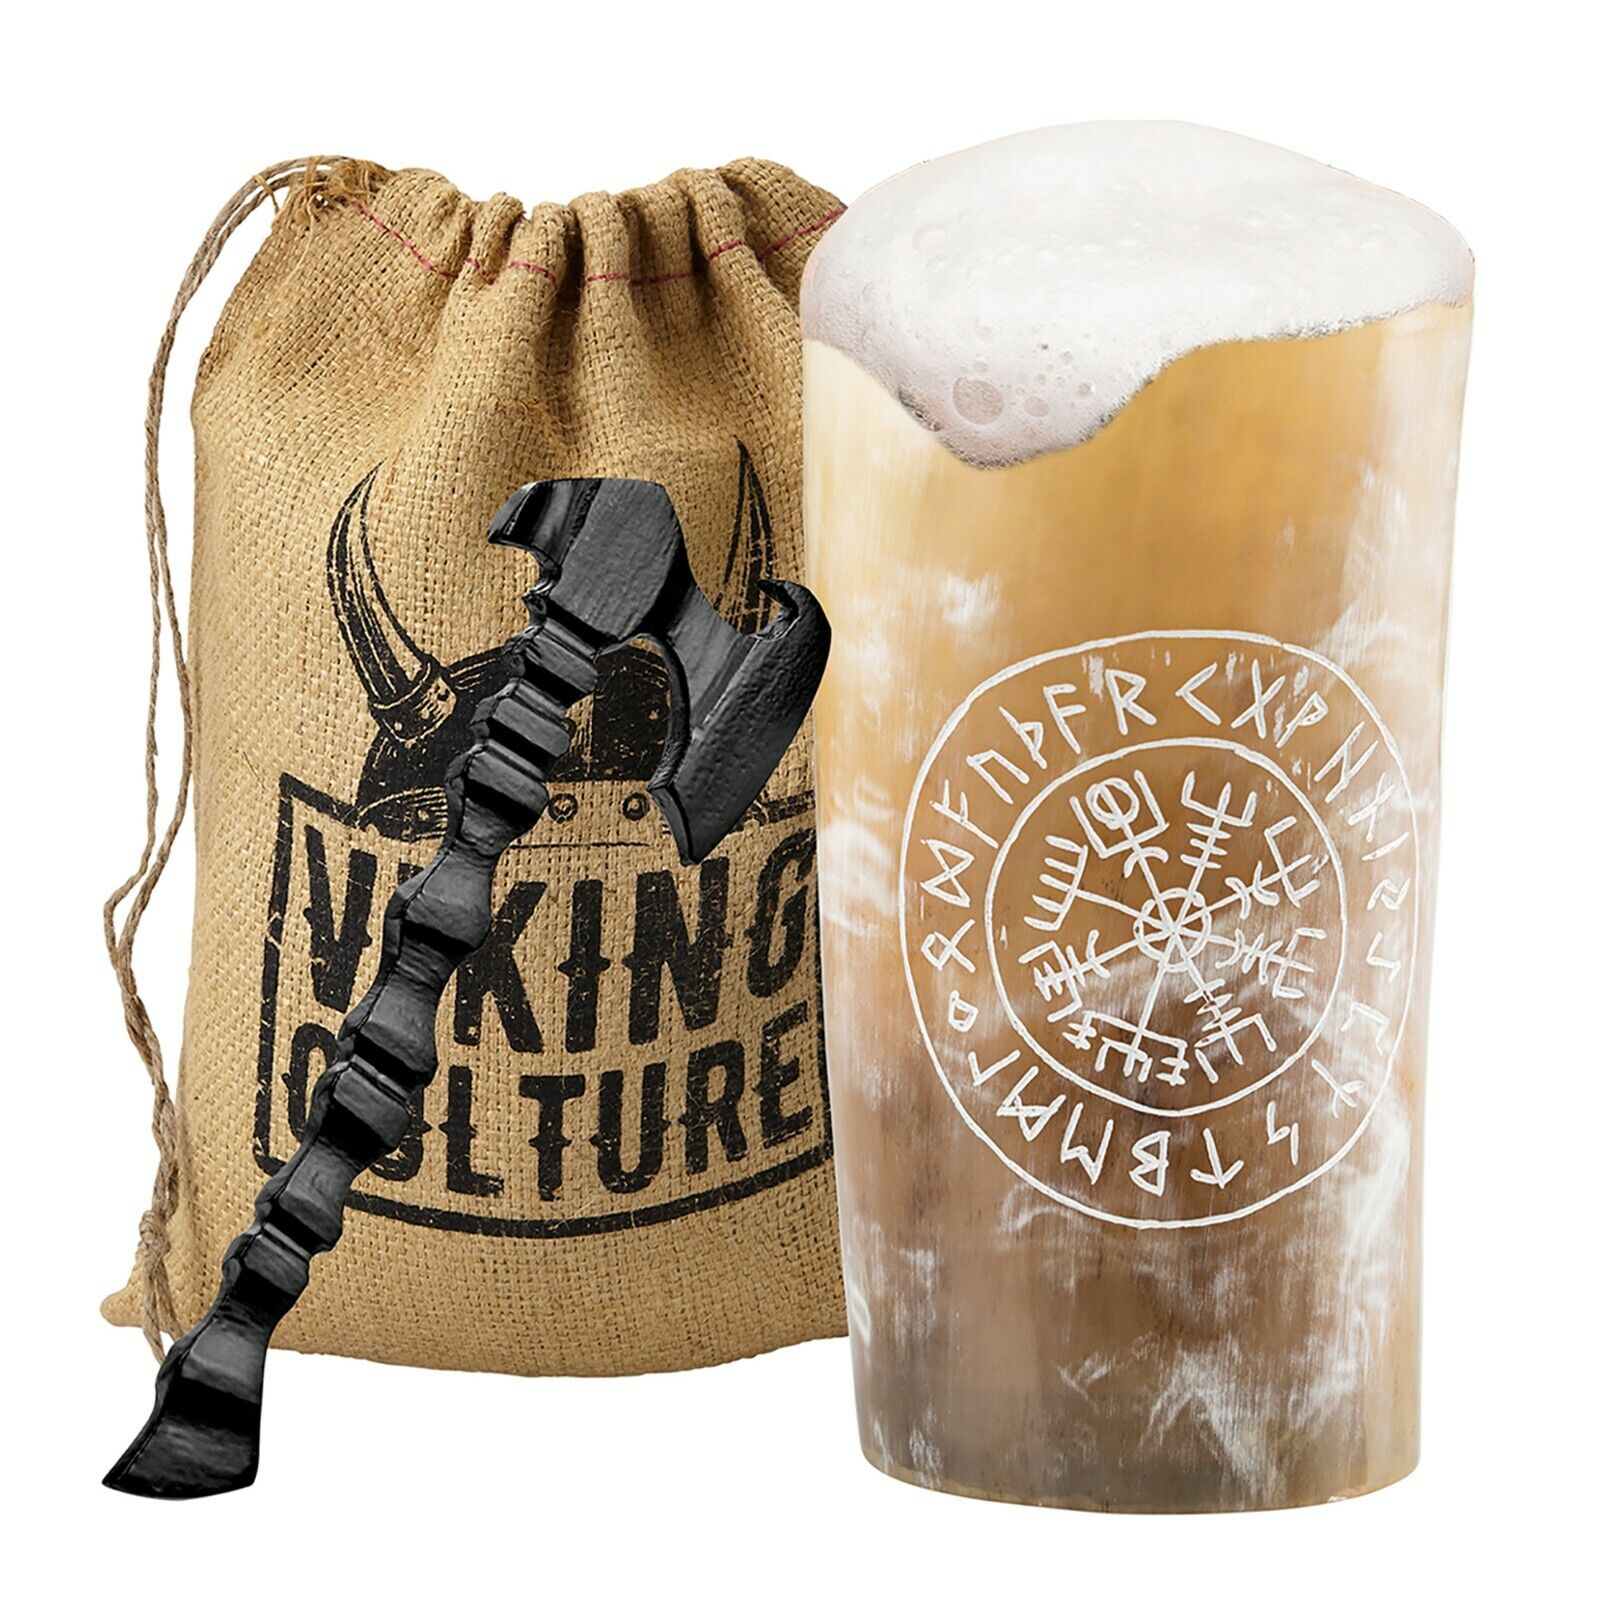 Viking Culture Horn Mead Cup with Axe Bottle Opener and Burlap Bag - Vegvisir 